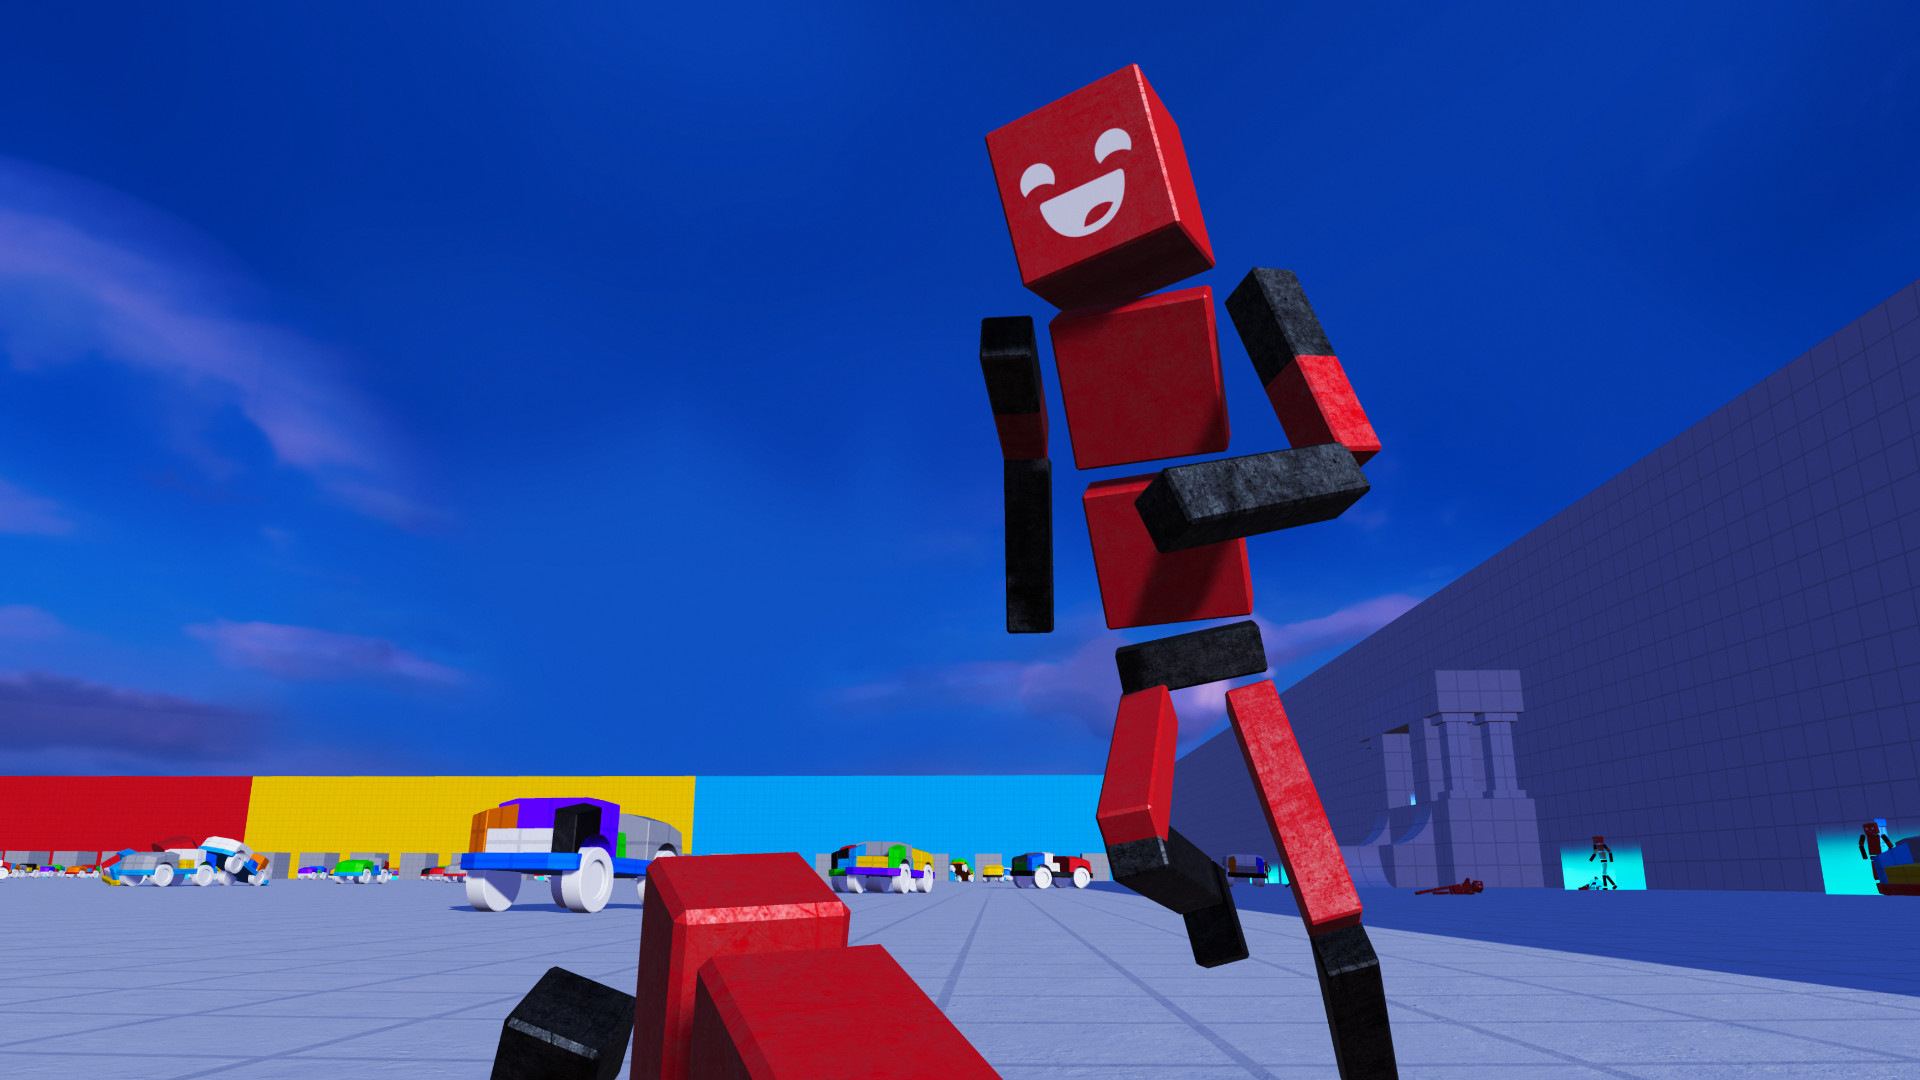 Save 50 On Fun With Ragdolls The Game On Steam - steam workshop roblox ports now with ragdolls